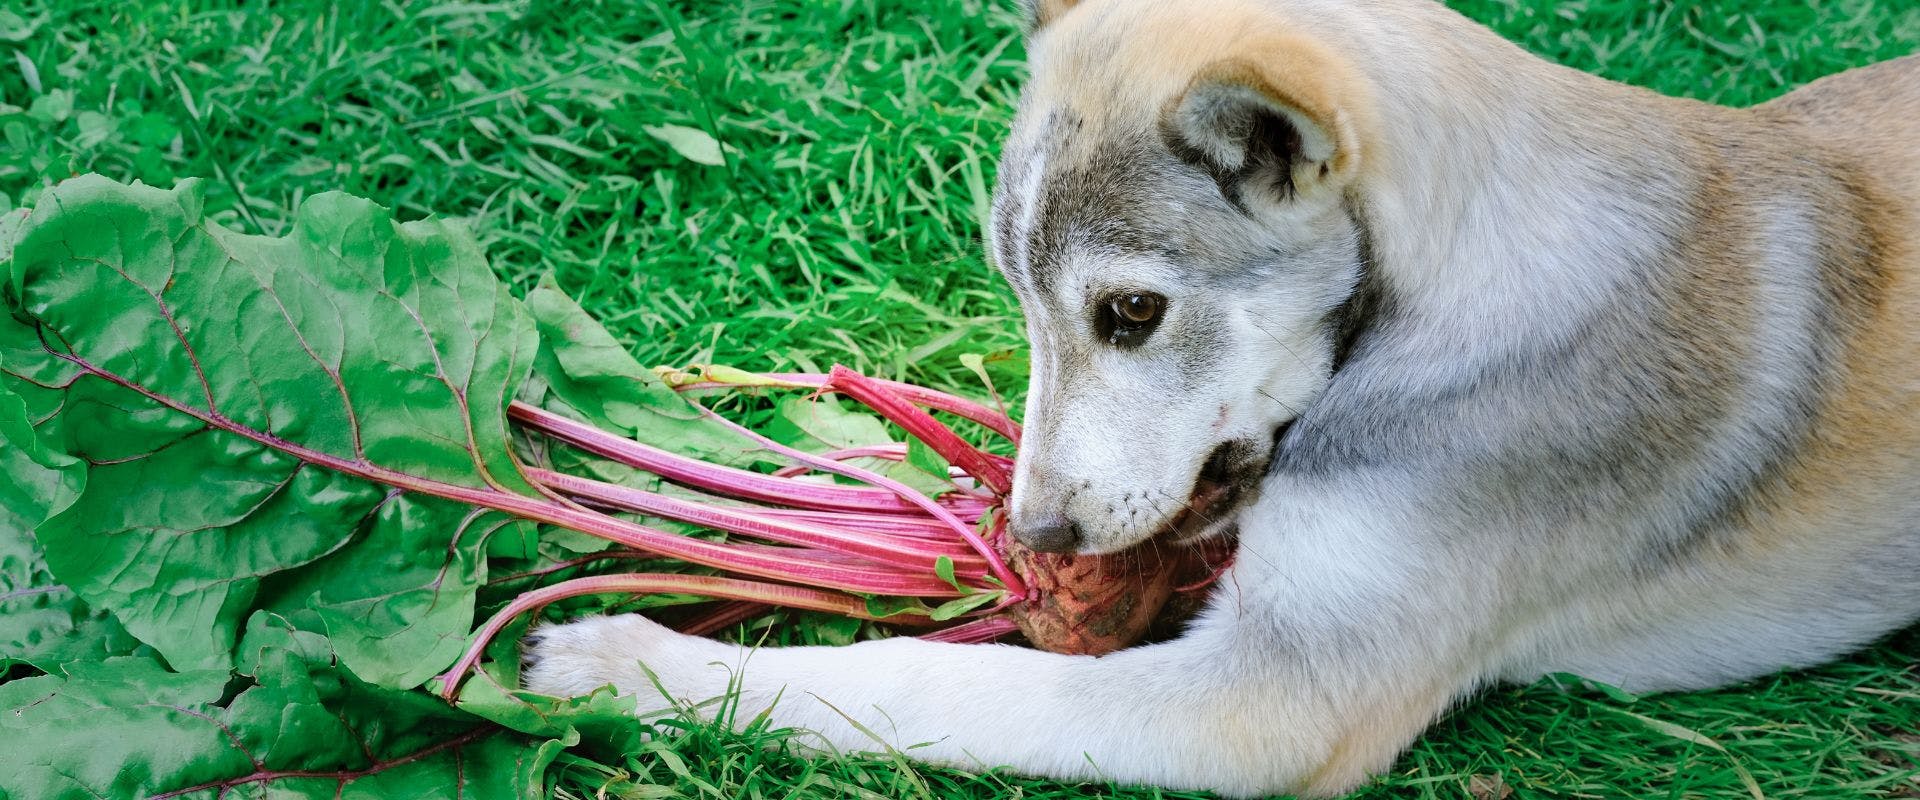 Dog eating beets raw on grass 